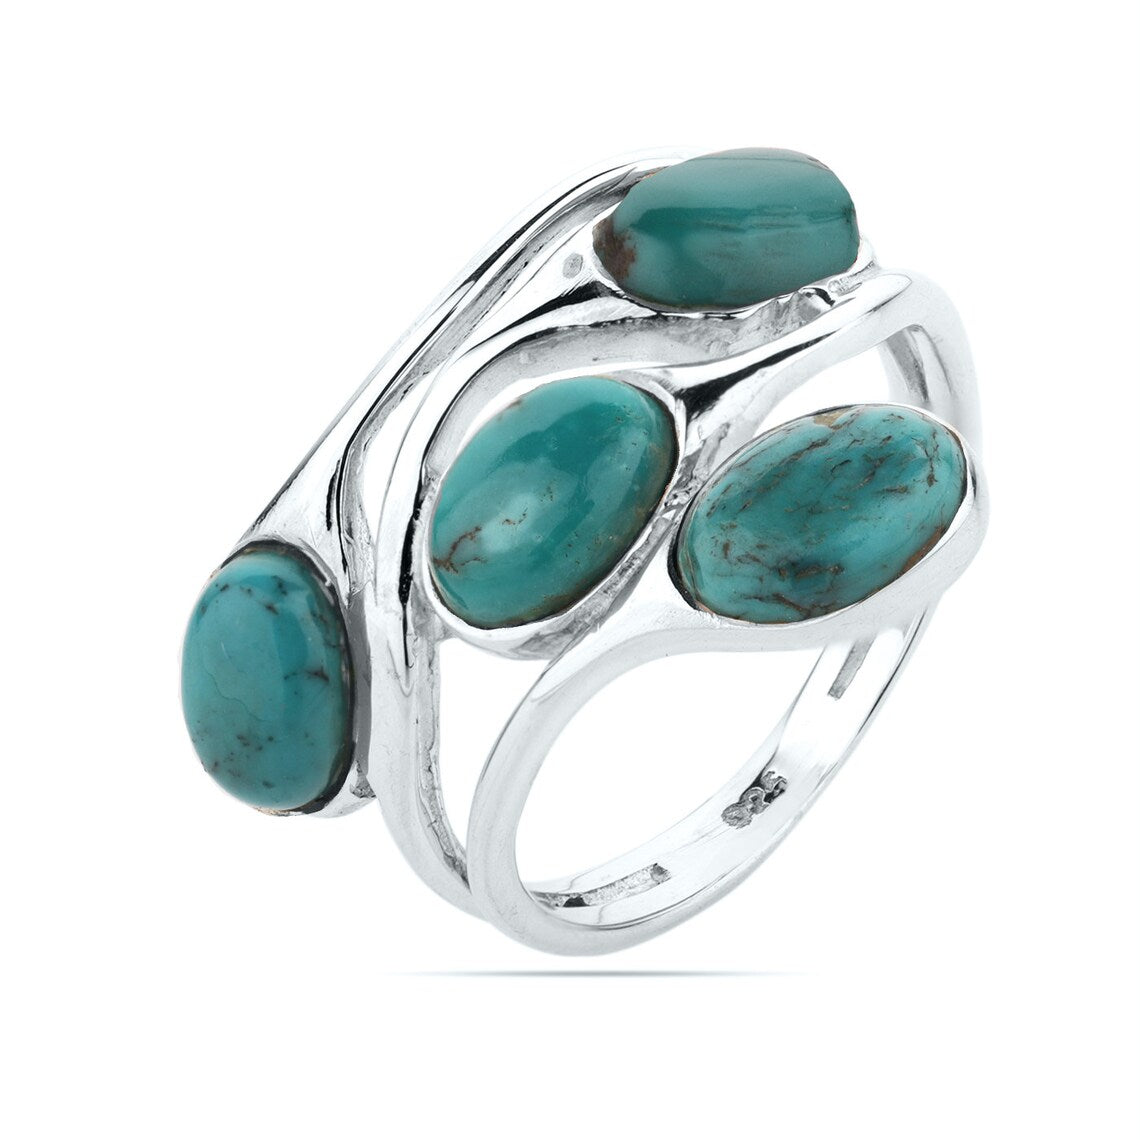 Turquoise Silver Ring, Multi Turquoise ring, sterling silver handmade ring, ring size 6-10 us